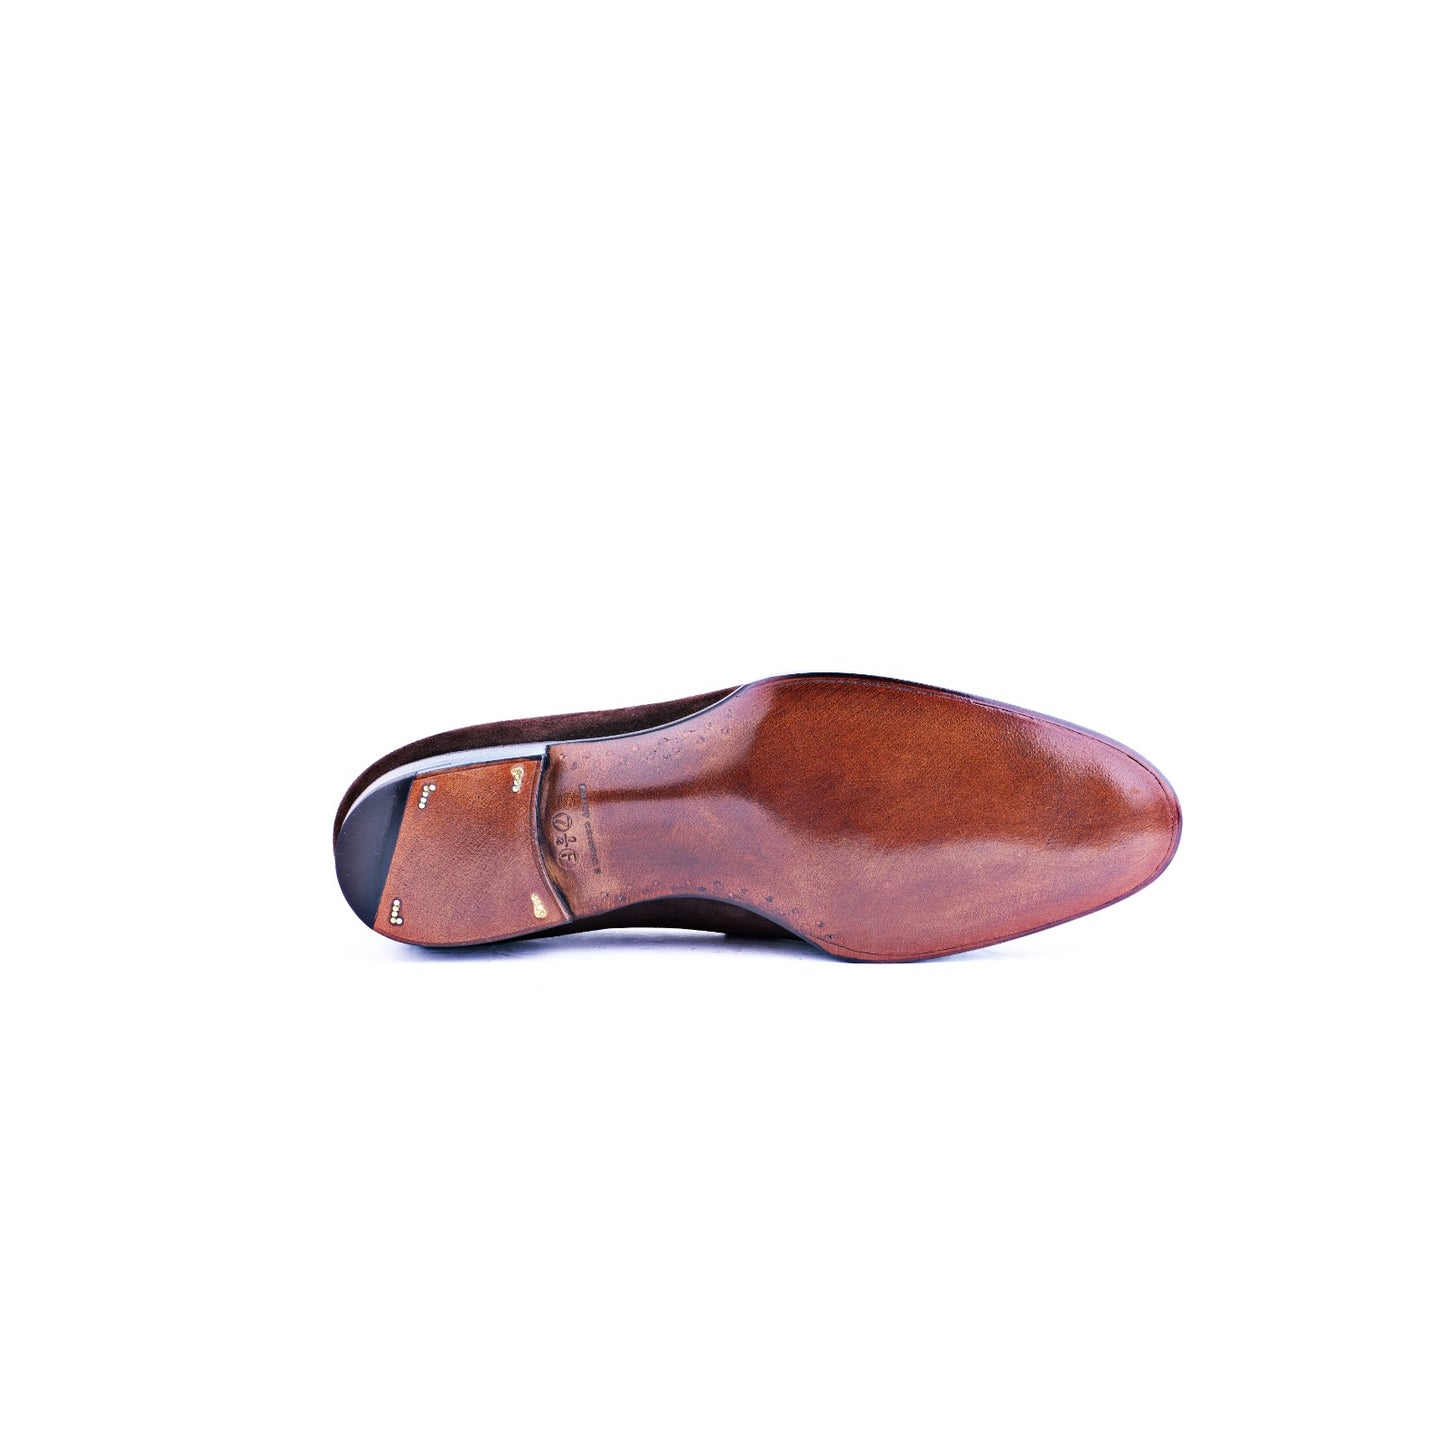 The Picadilly loafer with accentuated apron